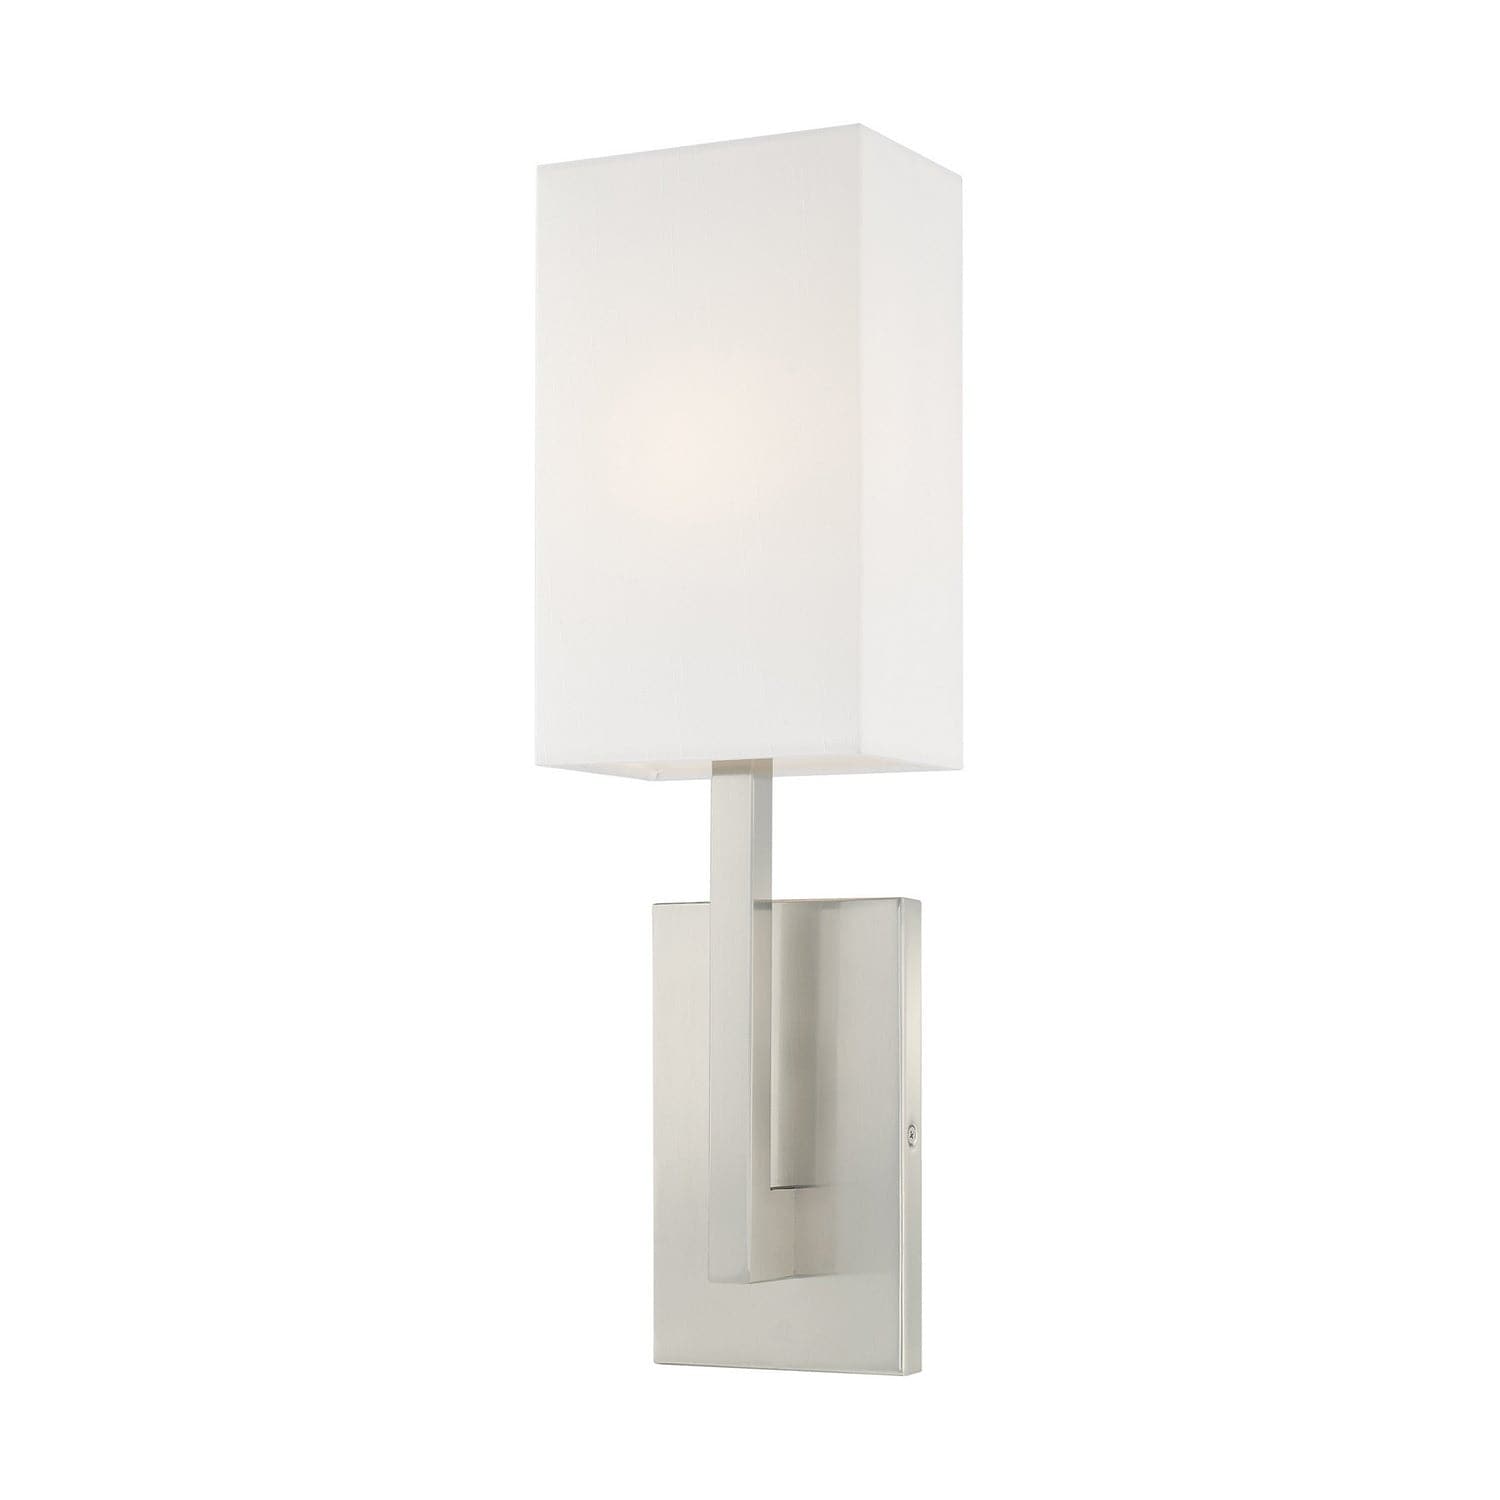 Livex Lighting - 42411-91 - One Light Wall Sconce - ADA Wall Sconces - Brushed Nickel